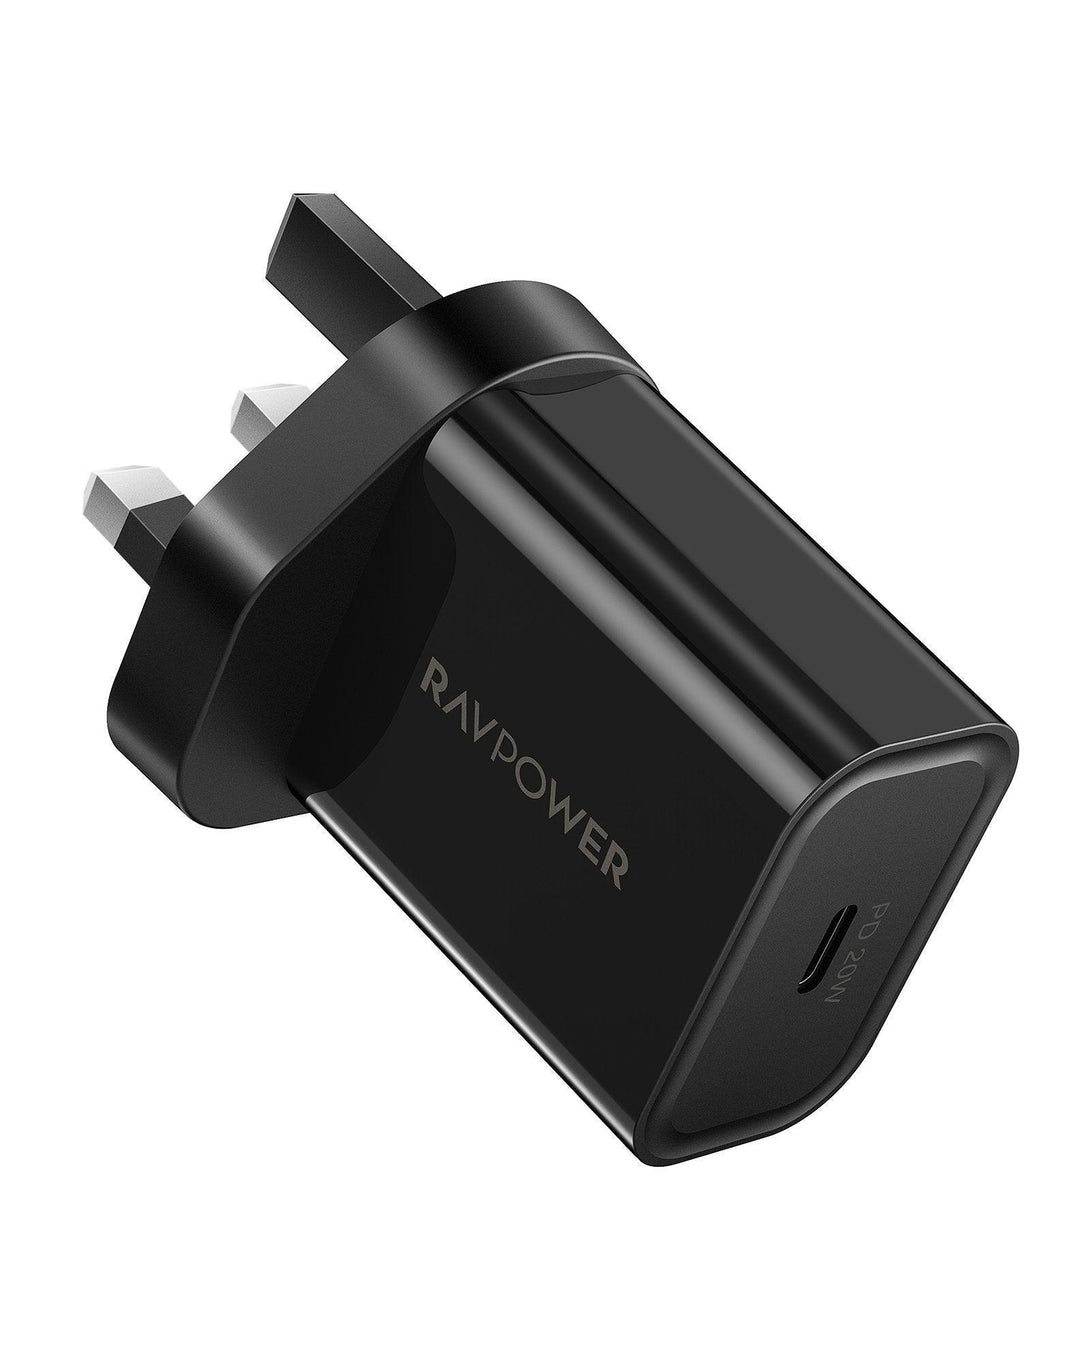 RAVPower PD Pioneer 20W Wall Charger - Black - Tech Goods